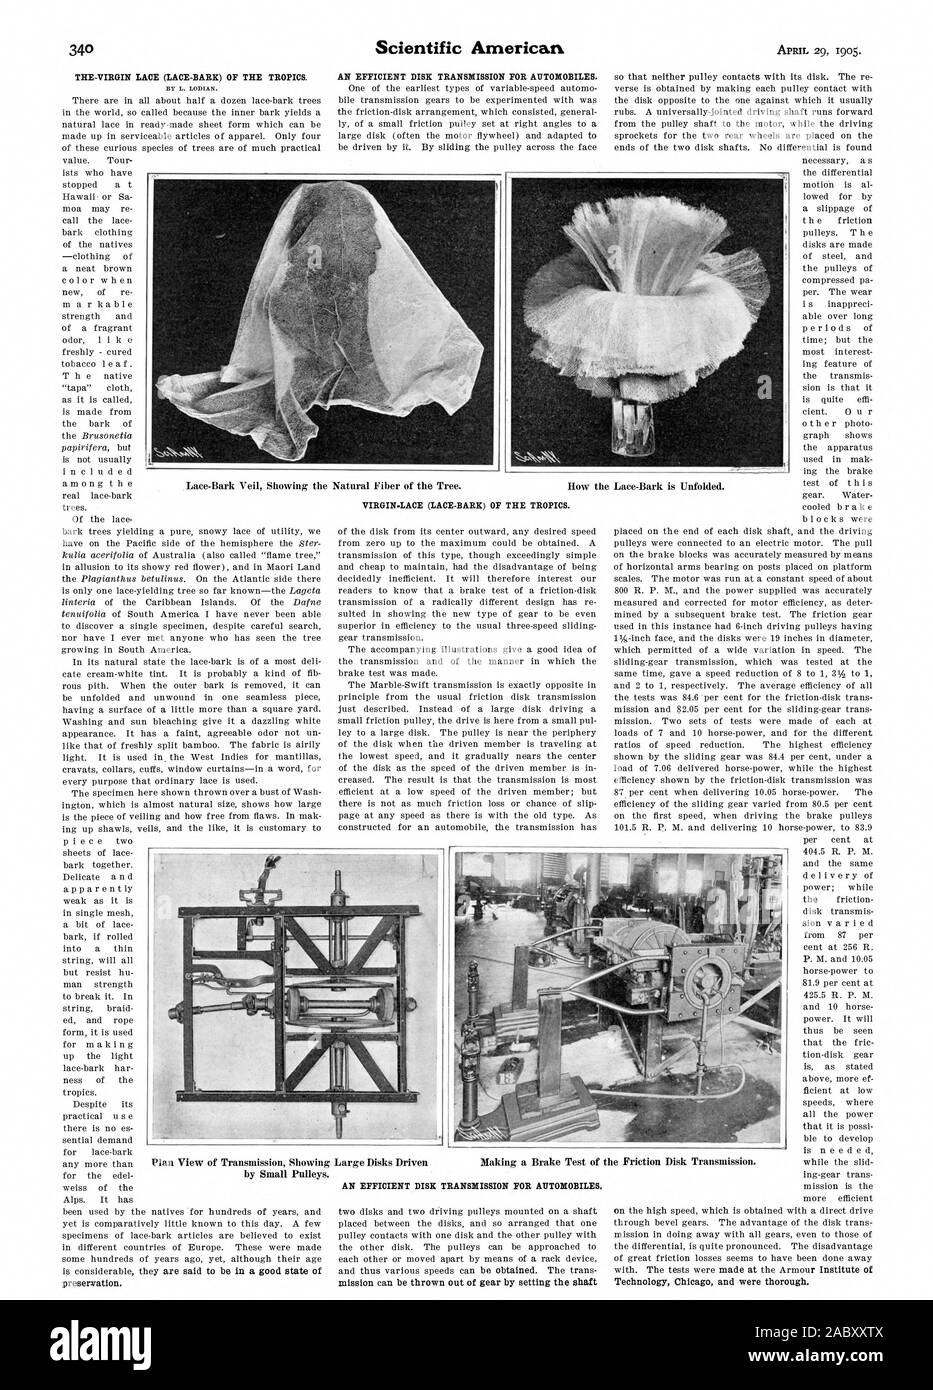 THE-VIRGIN LACE (LACE-BARK) OF THE TROPICS AN EFFICIENT DISK TRANSMISSION FOR AUTOMOBILES. VIRGIN.LACE (LACE-BARK) OF THE TROPICS. verse is obtained by making each pulley contact with the disk opposite to the one against which it usually AN EFFICIENT DISK TRANSMISSION FOR AUTOMOBILES., scientific american, 1905-04-29 Stock Photo